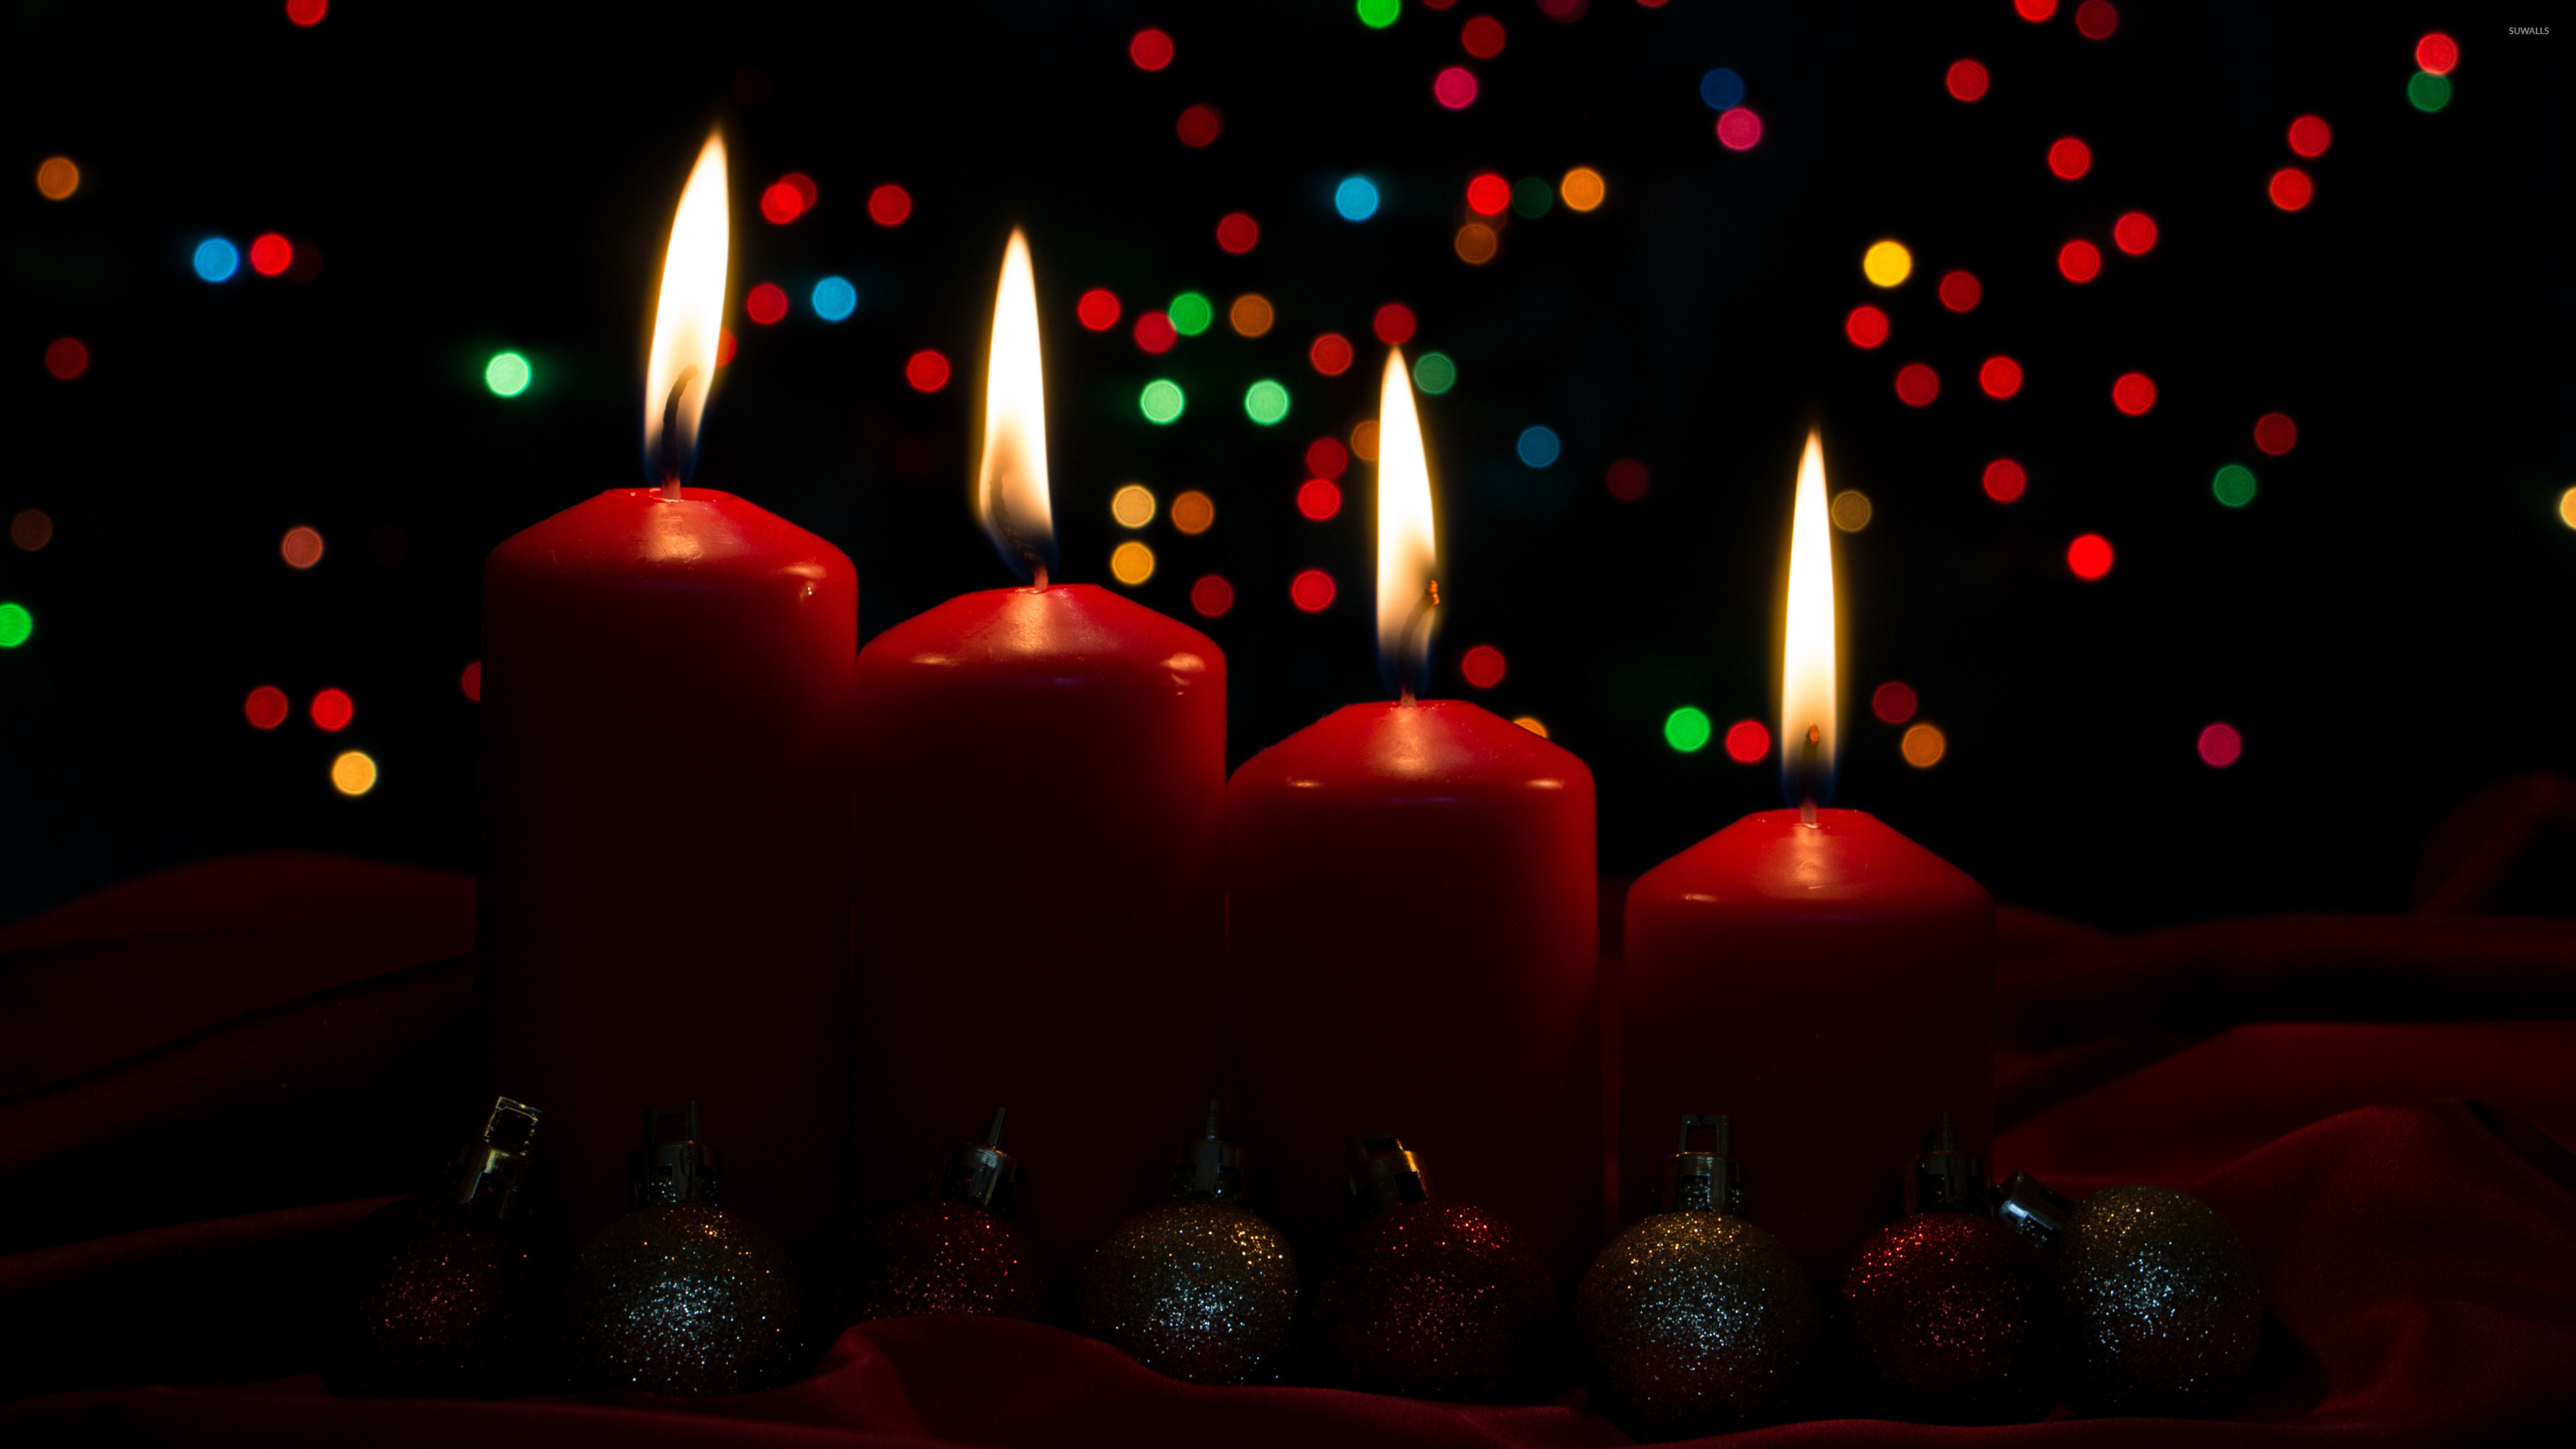 3840x2160 Red Advent candles wallpaper